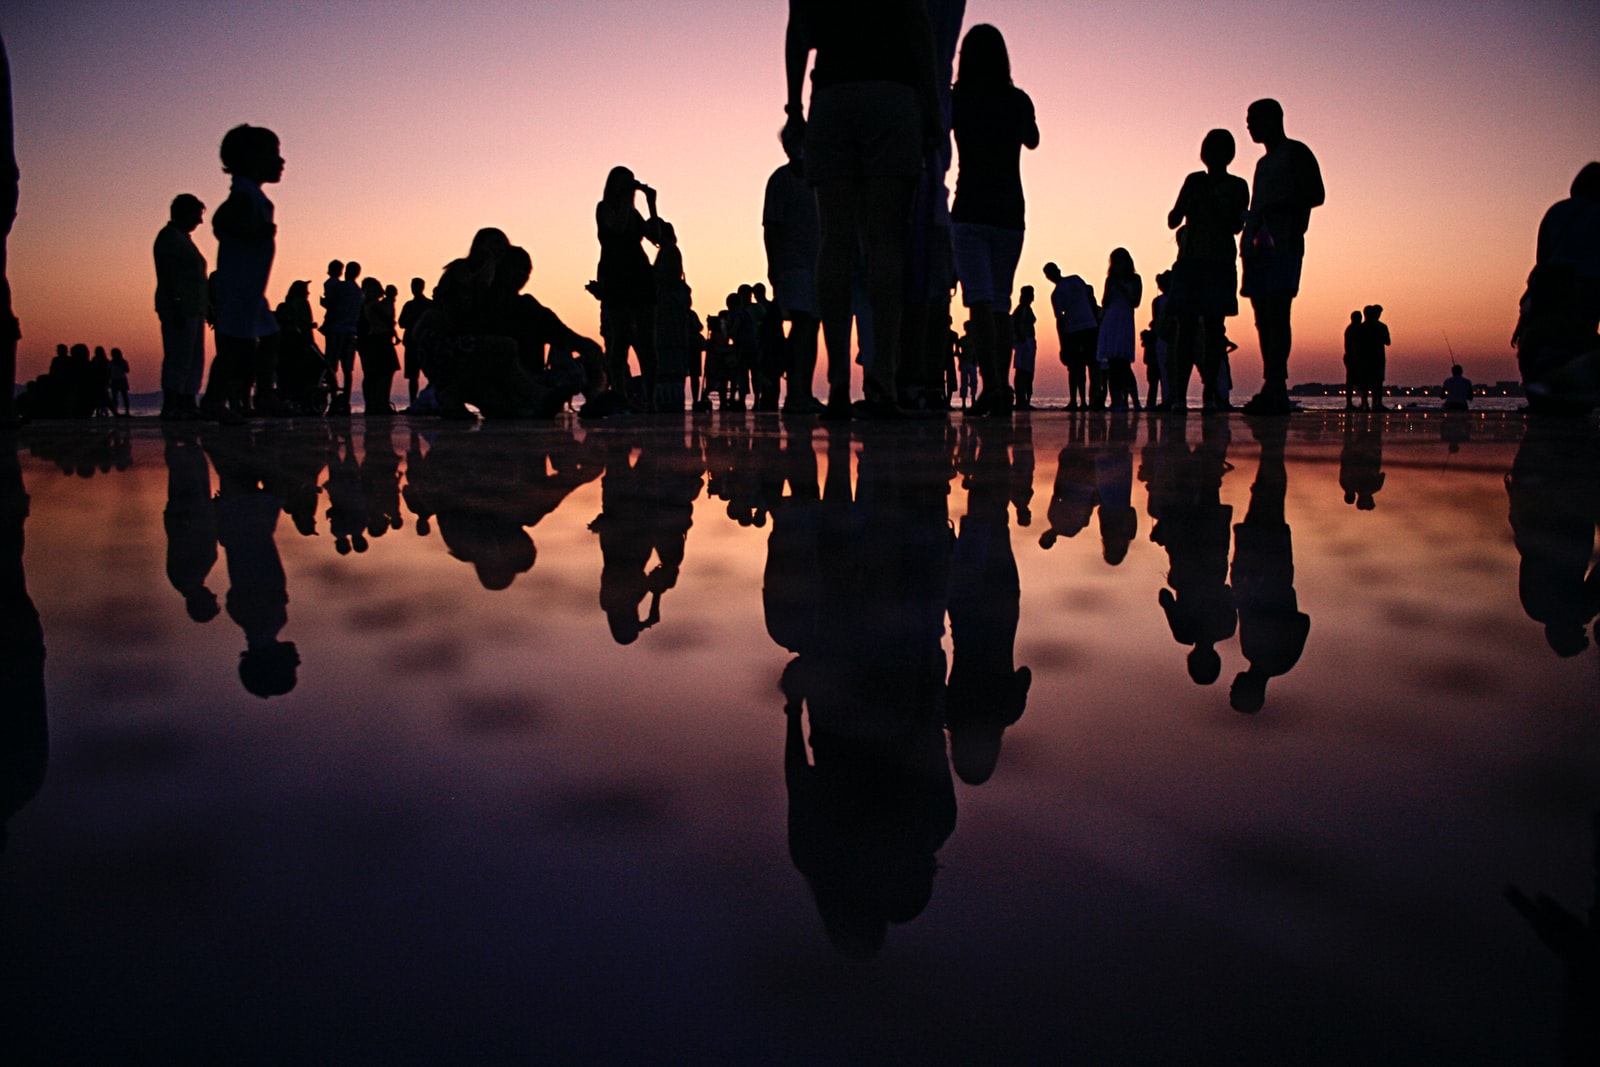 Many people, silhouetted against sunset